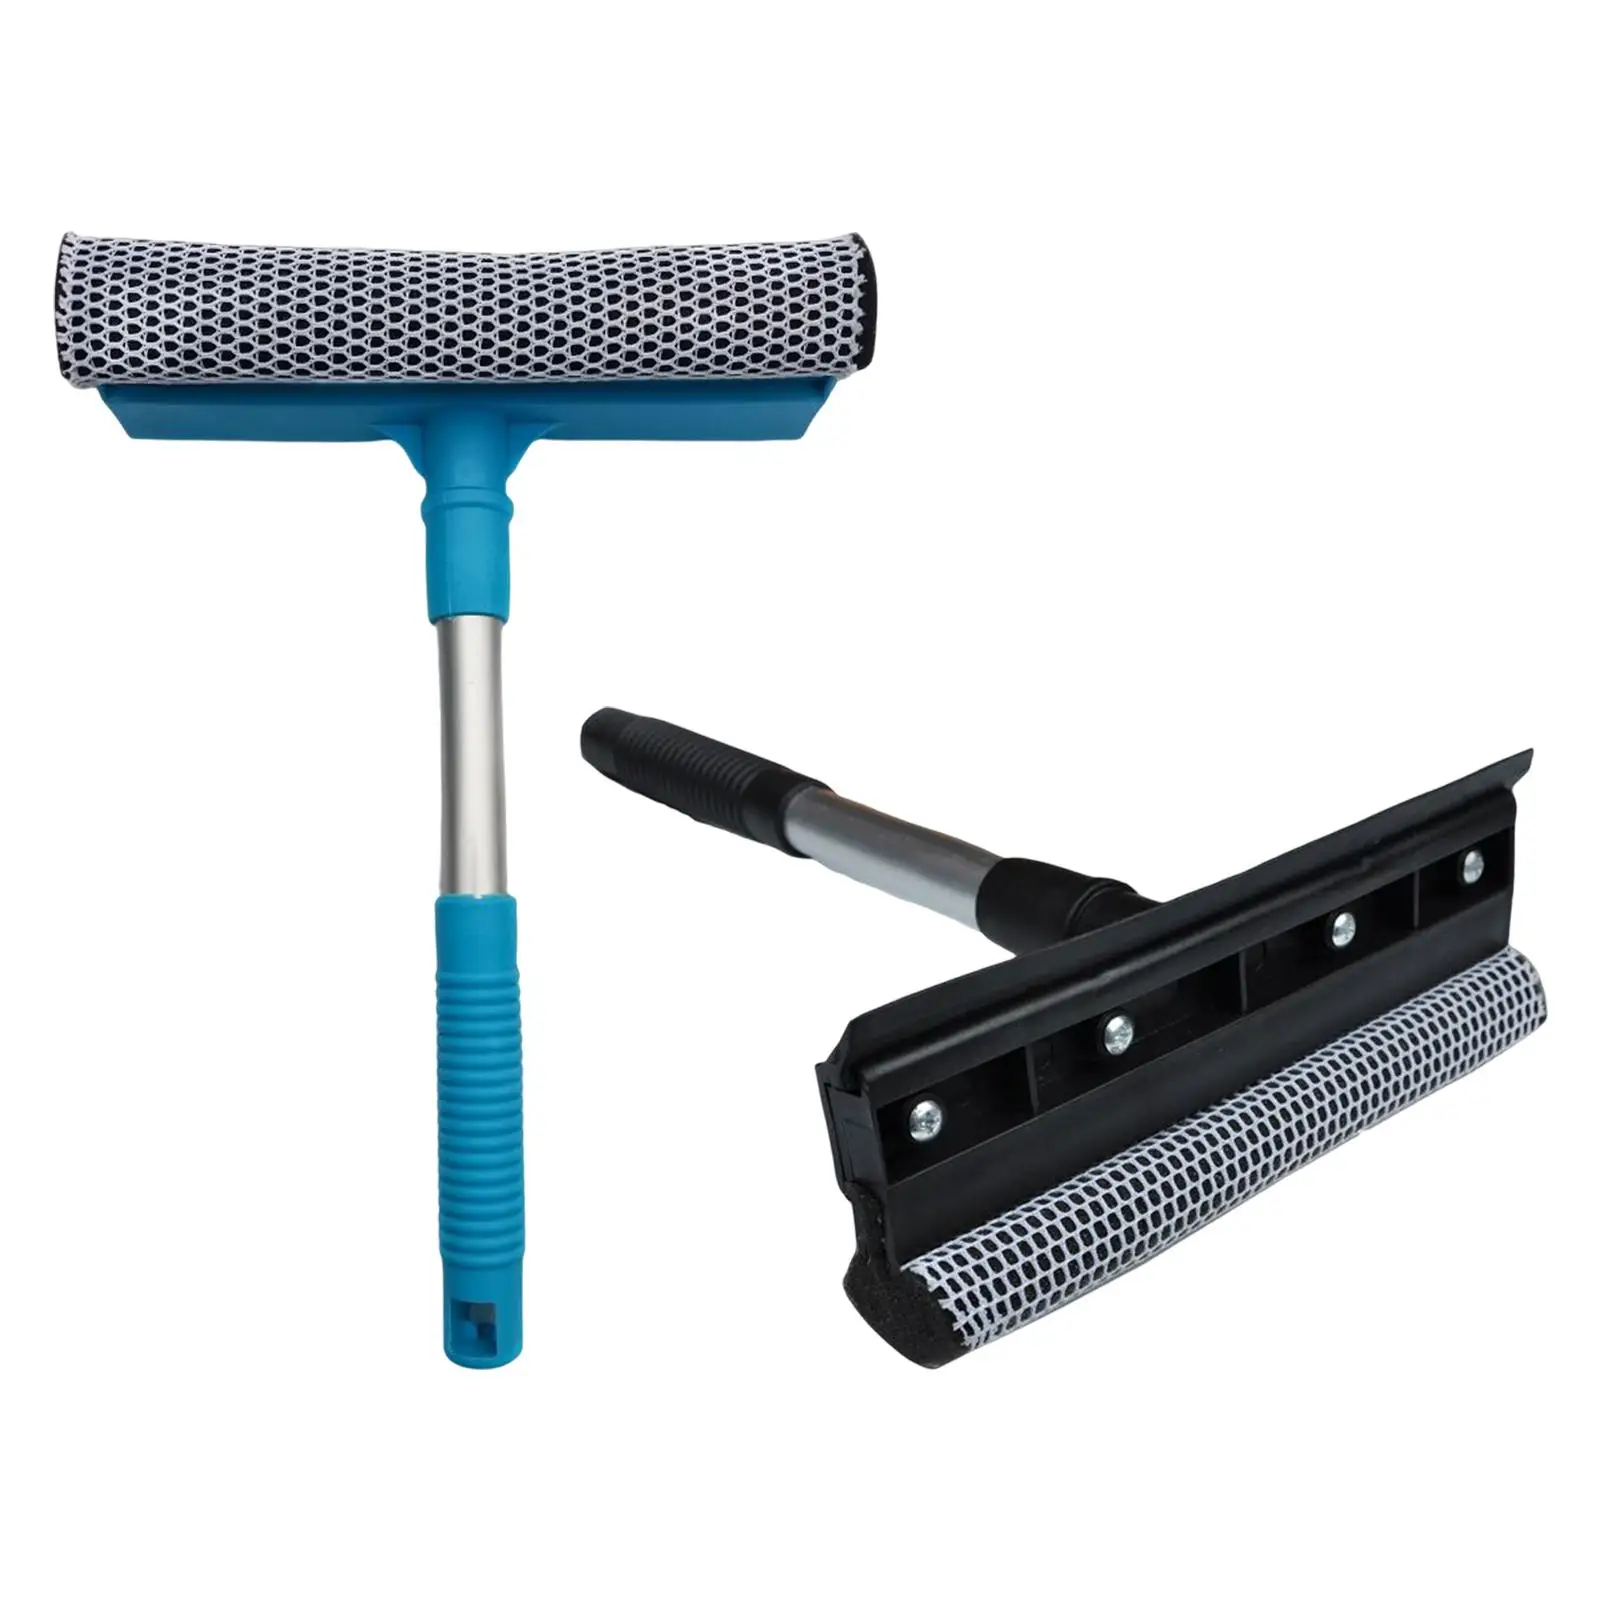 Window Wiper ,Window Washer ,Squeegee ,Window Cleaner Brush,chen Cleaning Tools .Glass Wiper. for shower Tile Floor